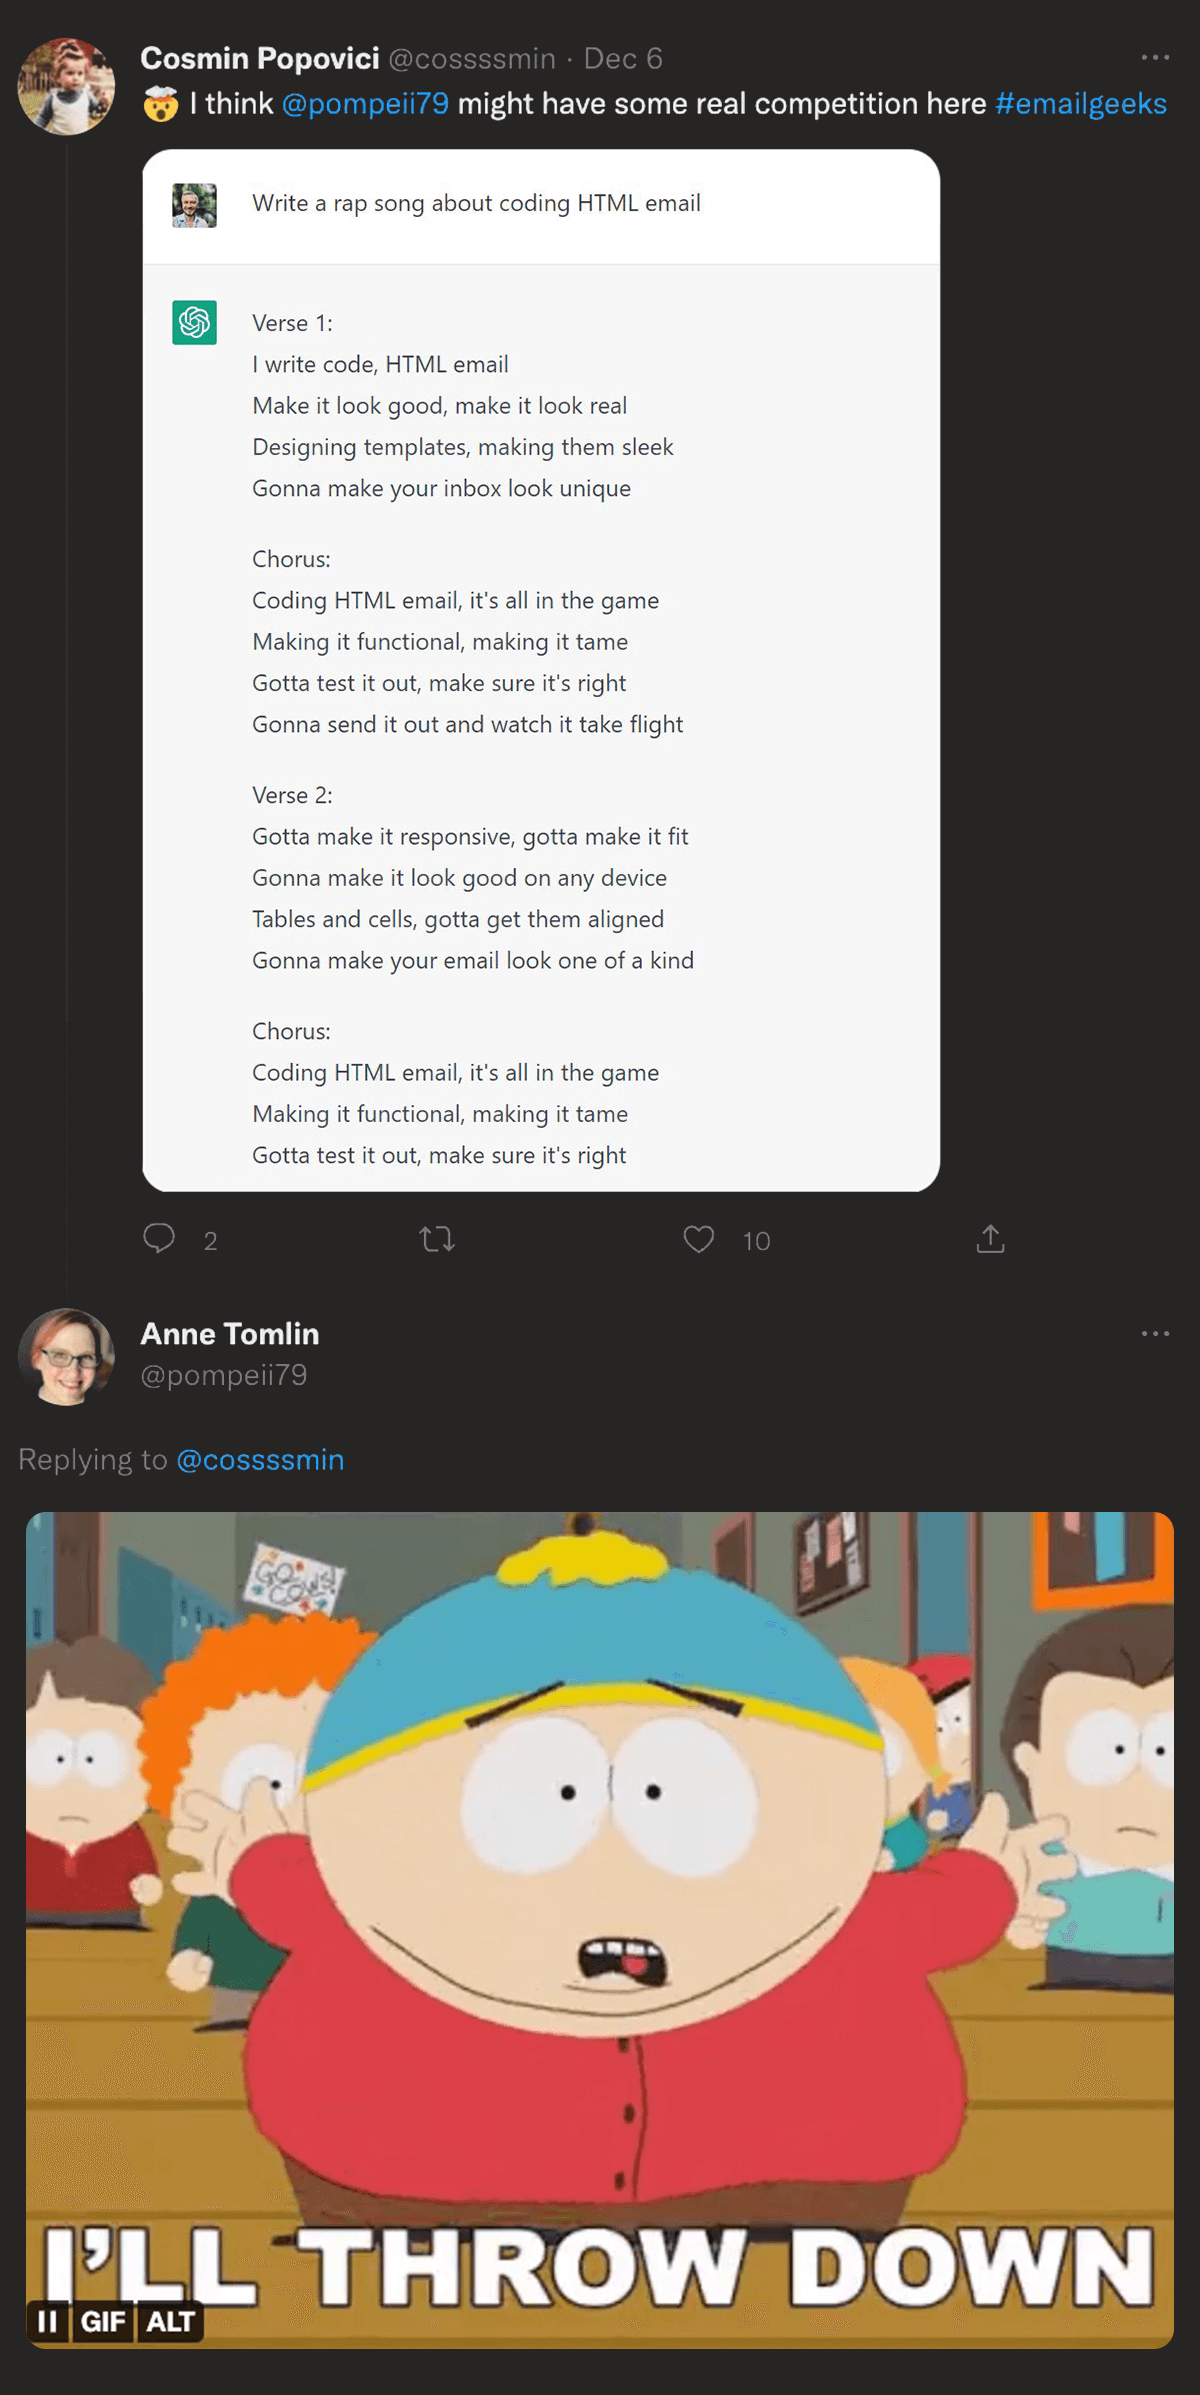 @cossssmin on twitter: I think @pompeii79 might have some real competition here #emailgeeks chatGPT produces a rap song about coding emails. @pompeii79 responds with Cartman saying I'll throw down.